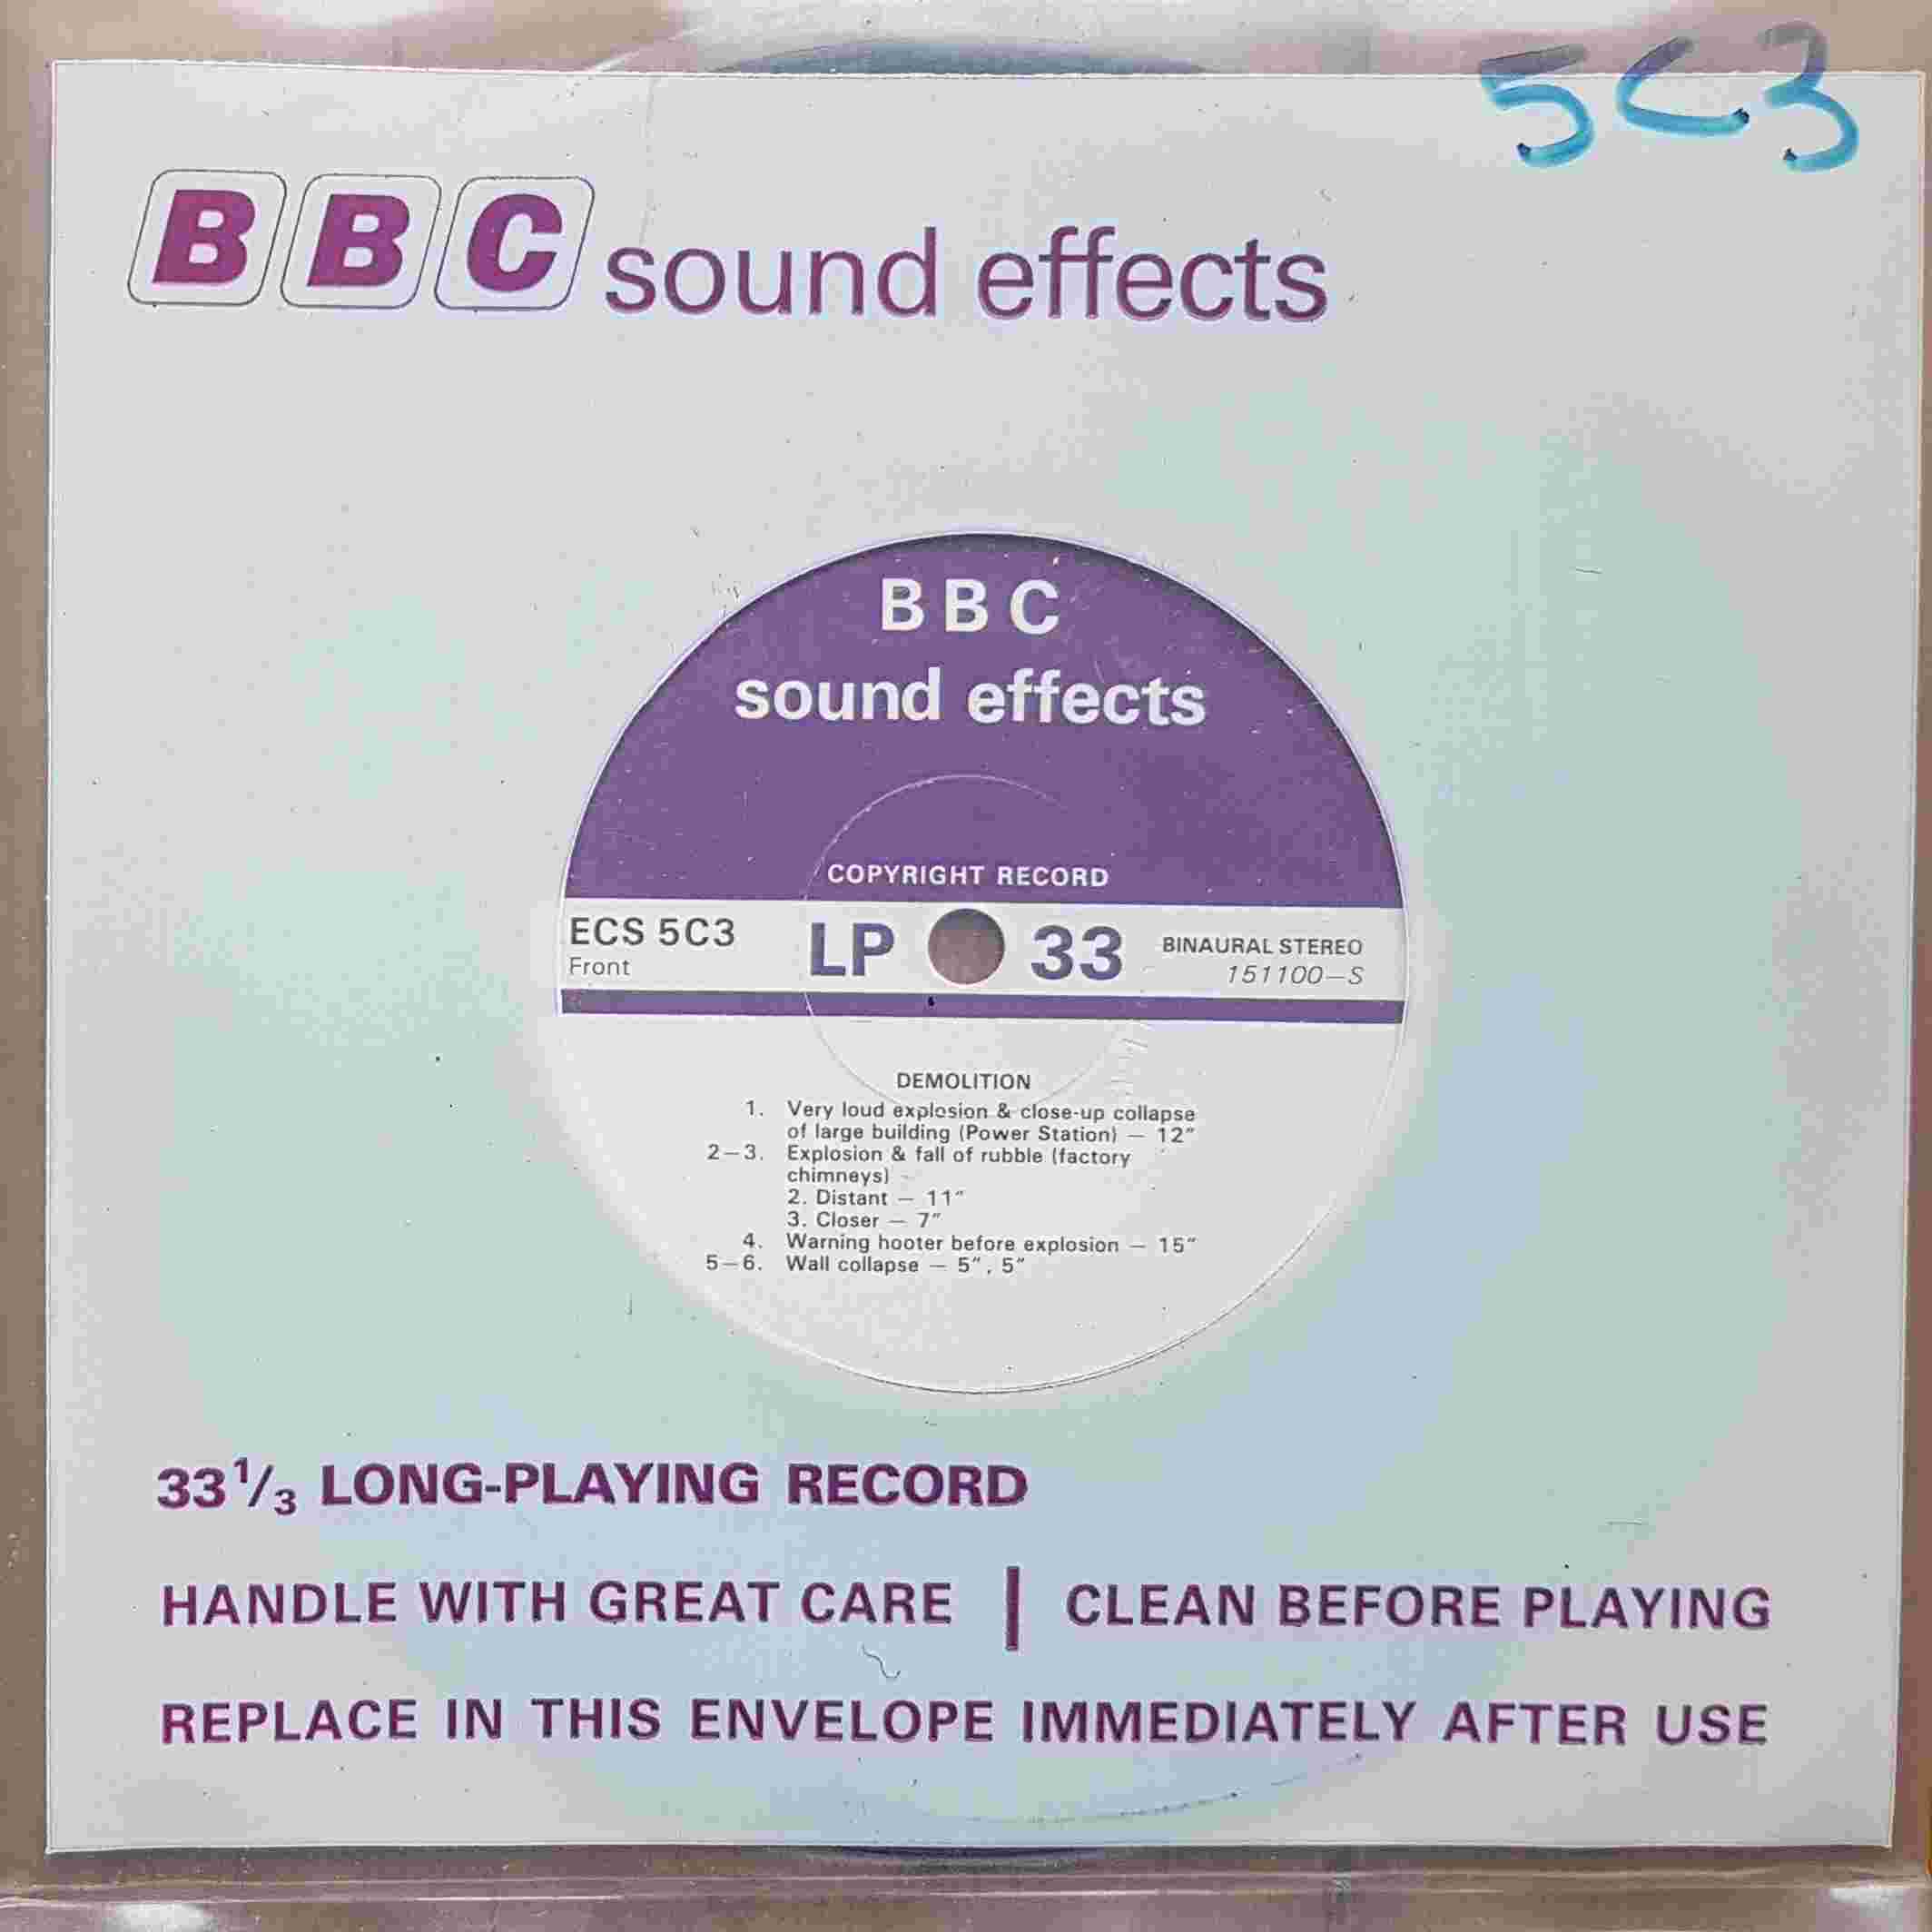 Picture of ECS 5C3 Demolition by artist Not registered from the BBC singles - Records and Tapes library